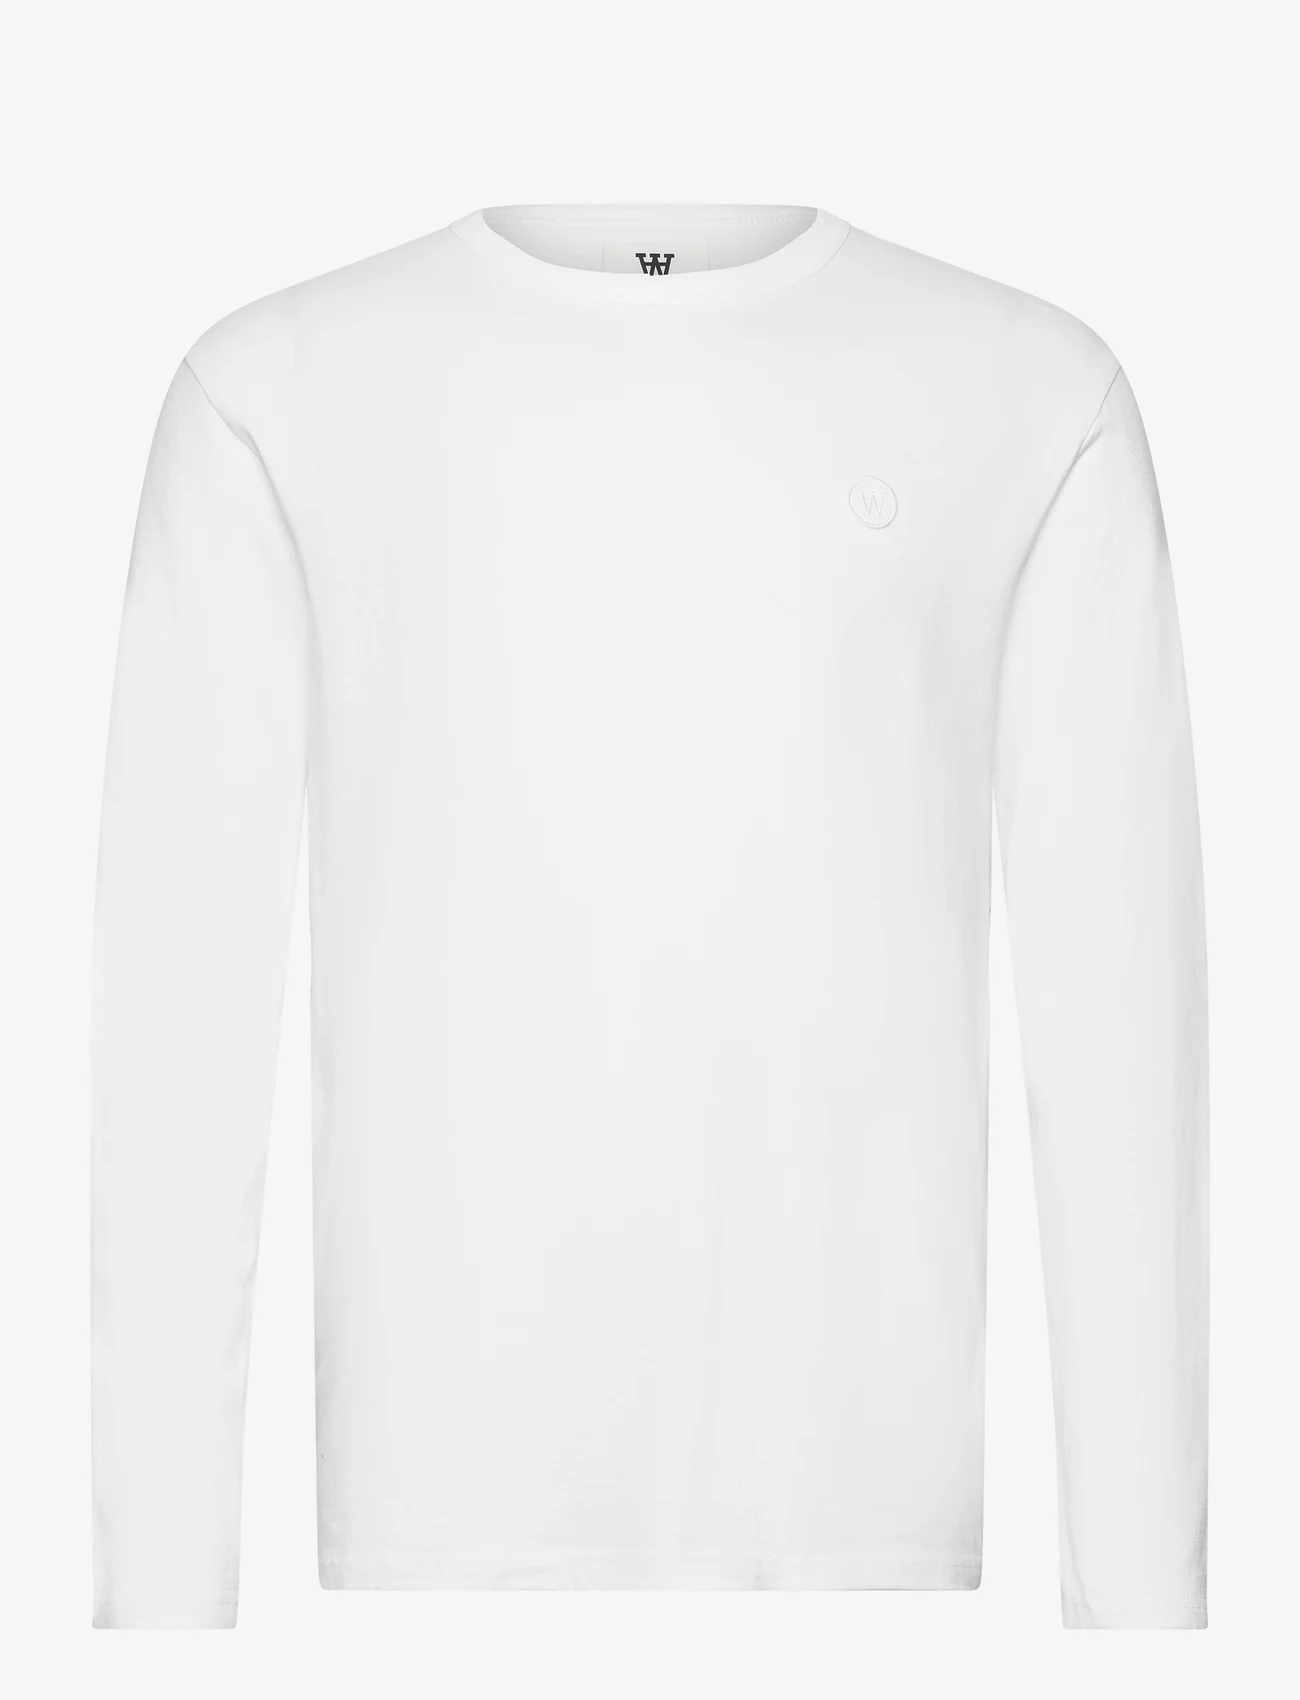 Double A by Wood Wood - Mel long sleeve GOTS - t-shirts - white/white - 0